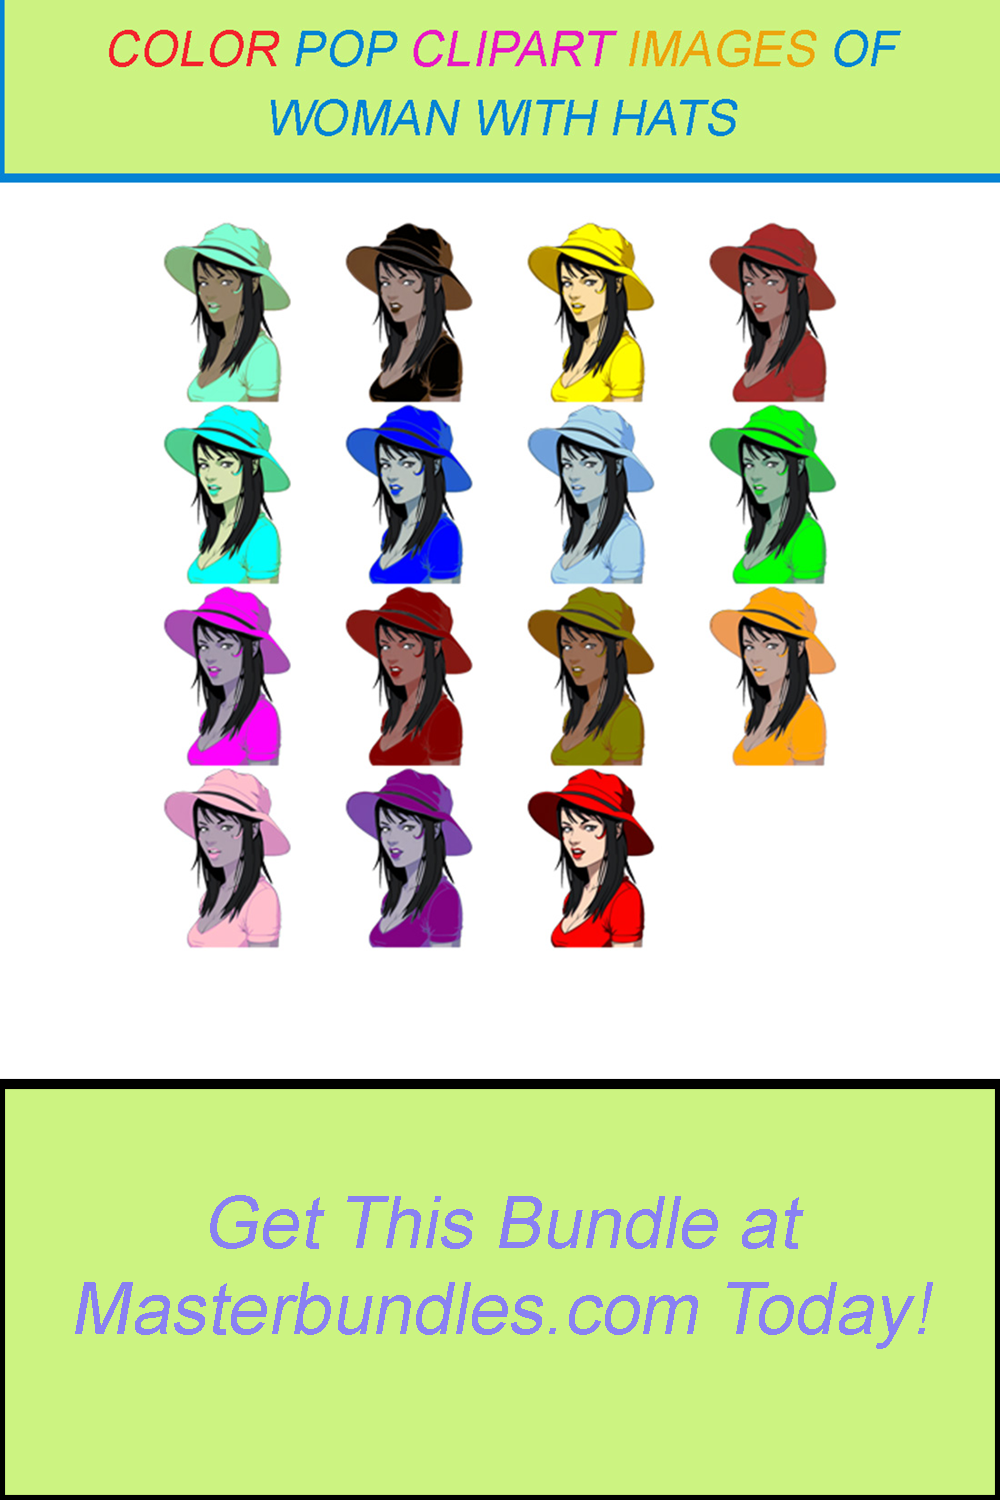 15 COLOR POP CLIPART IMAGES OF WOMAN WITH HATS pinterest preview image.